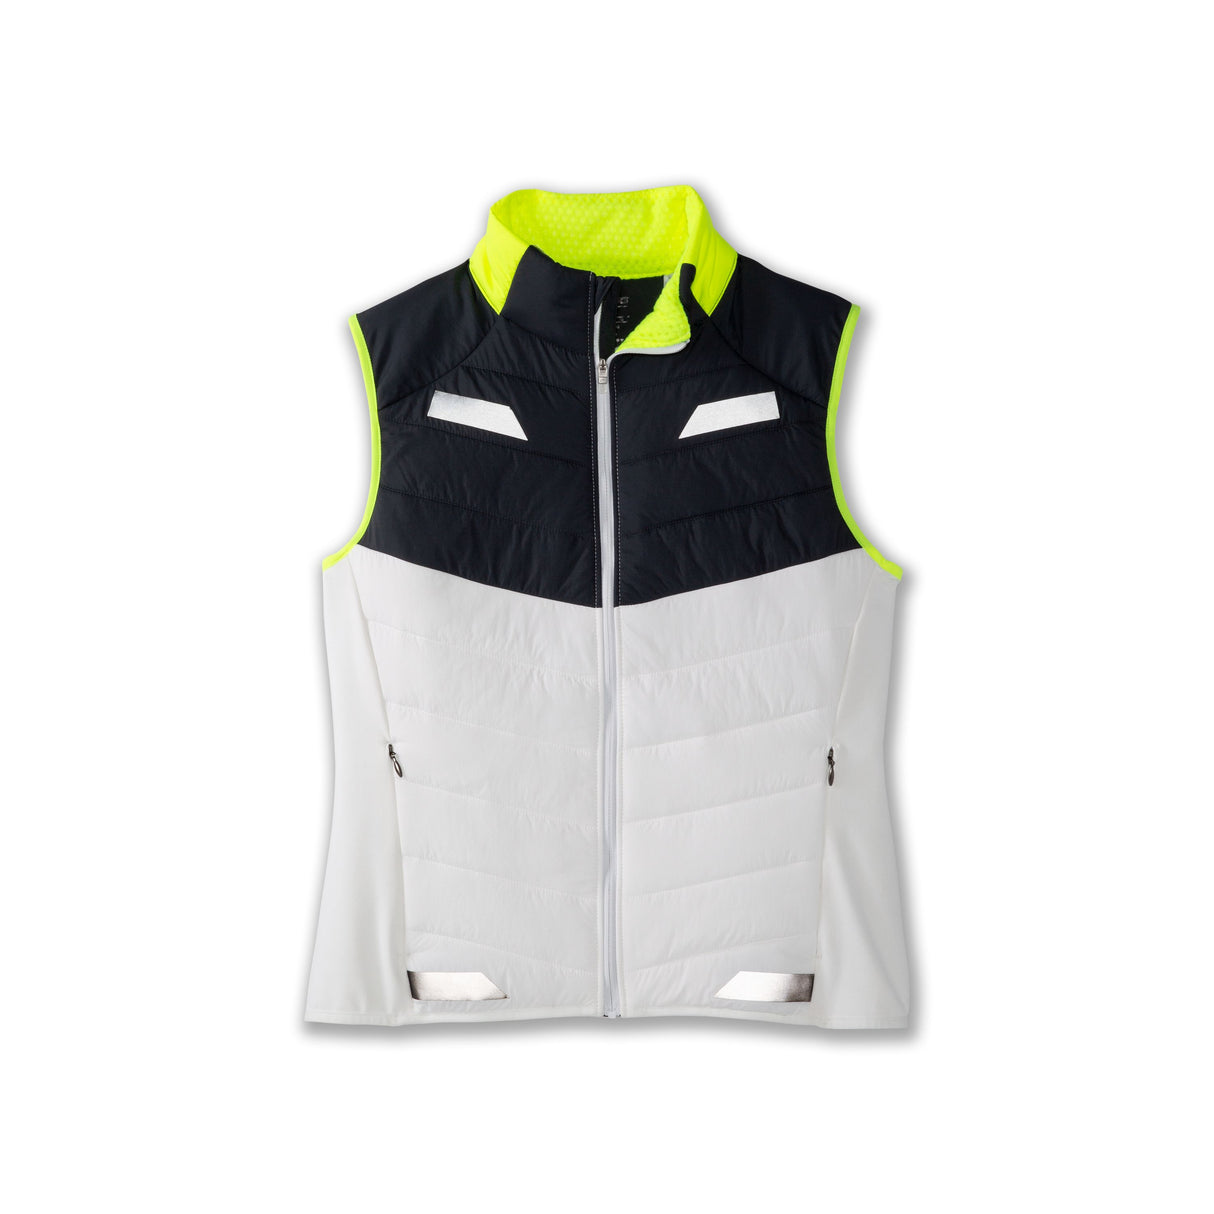 Brooks Women's Run Visible Insulated Vest